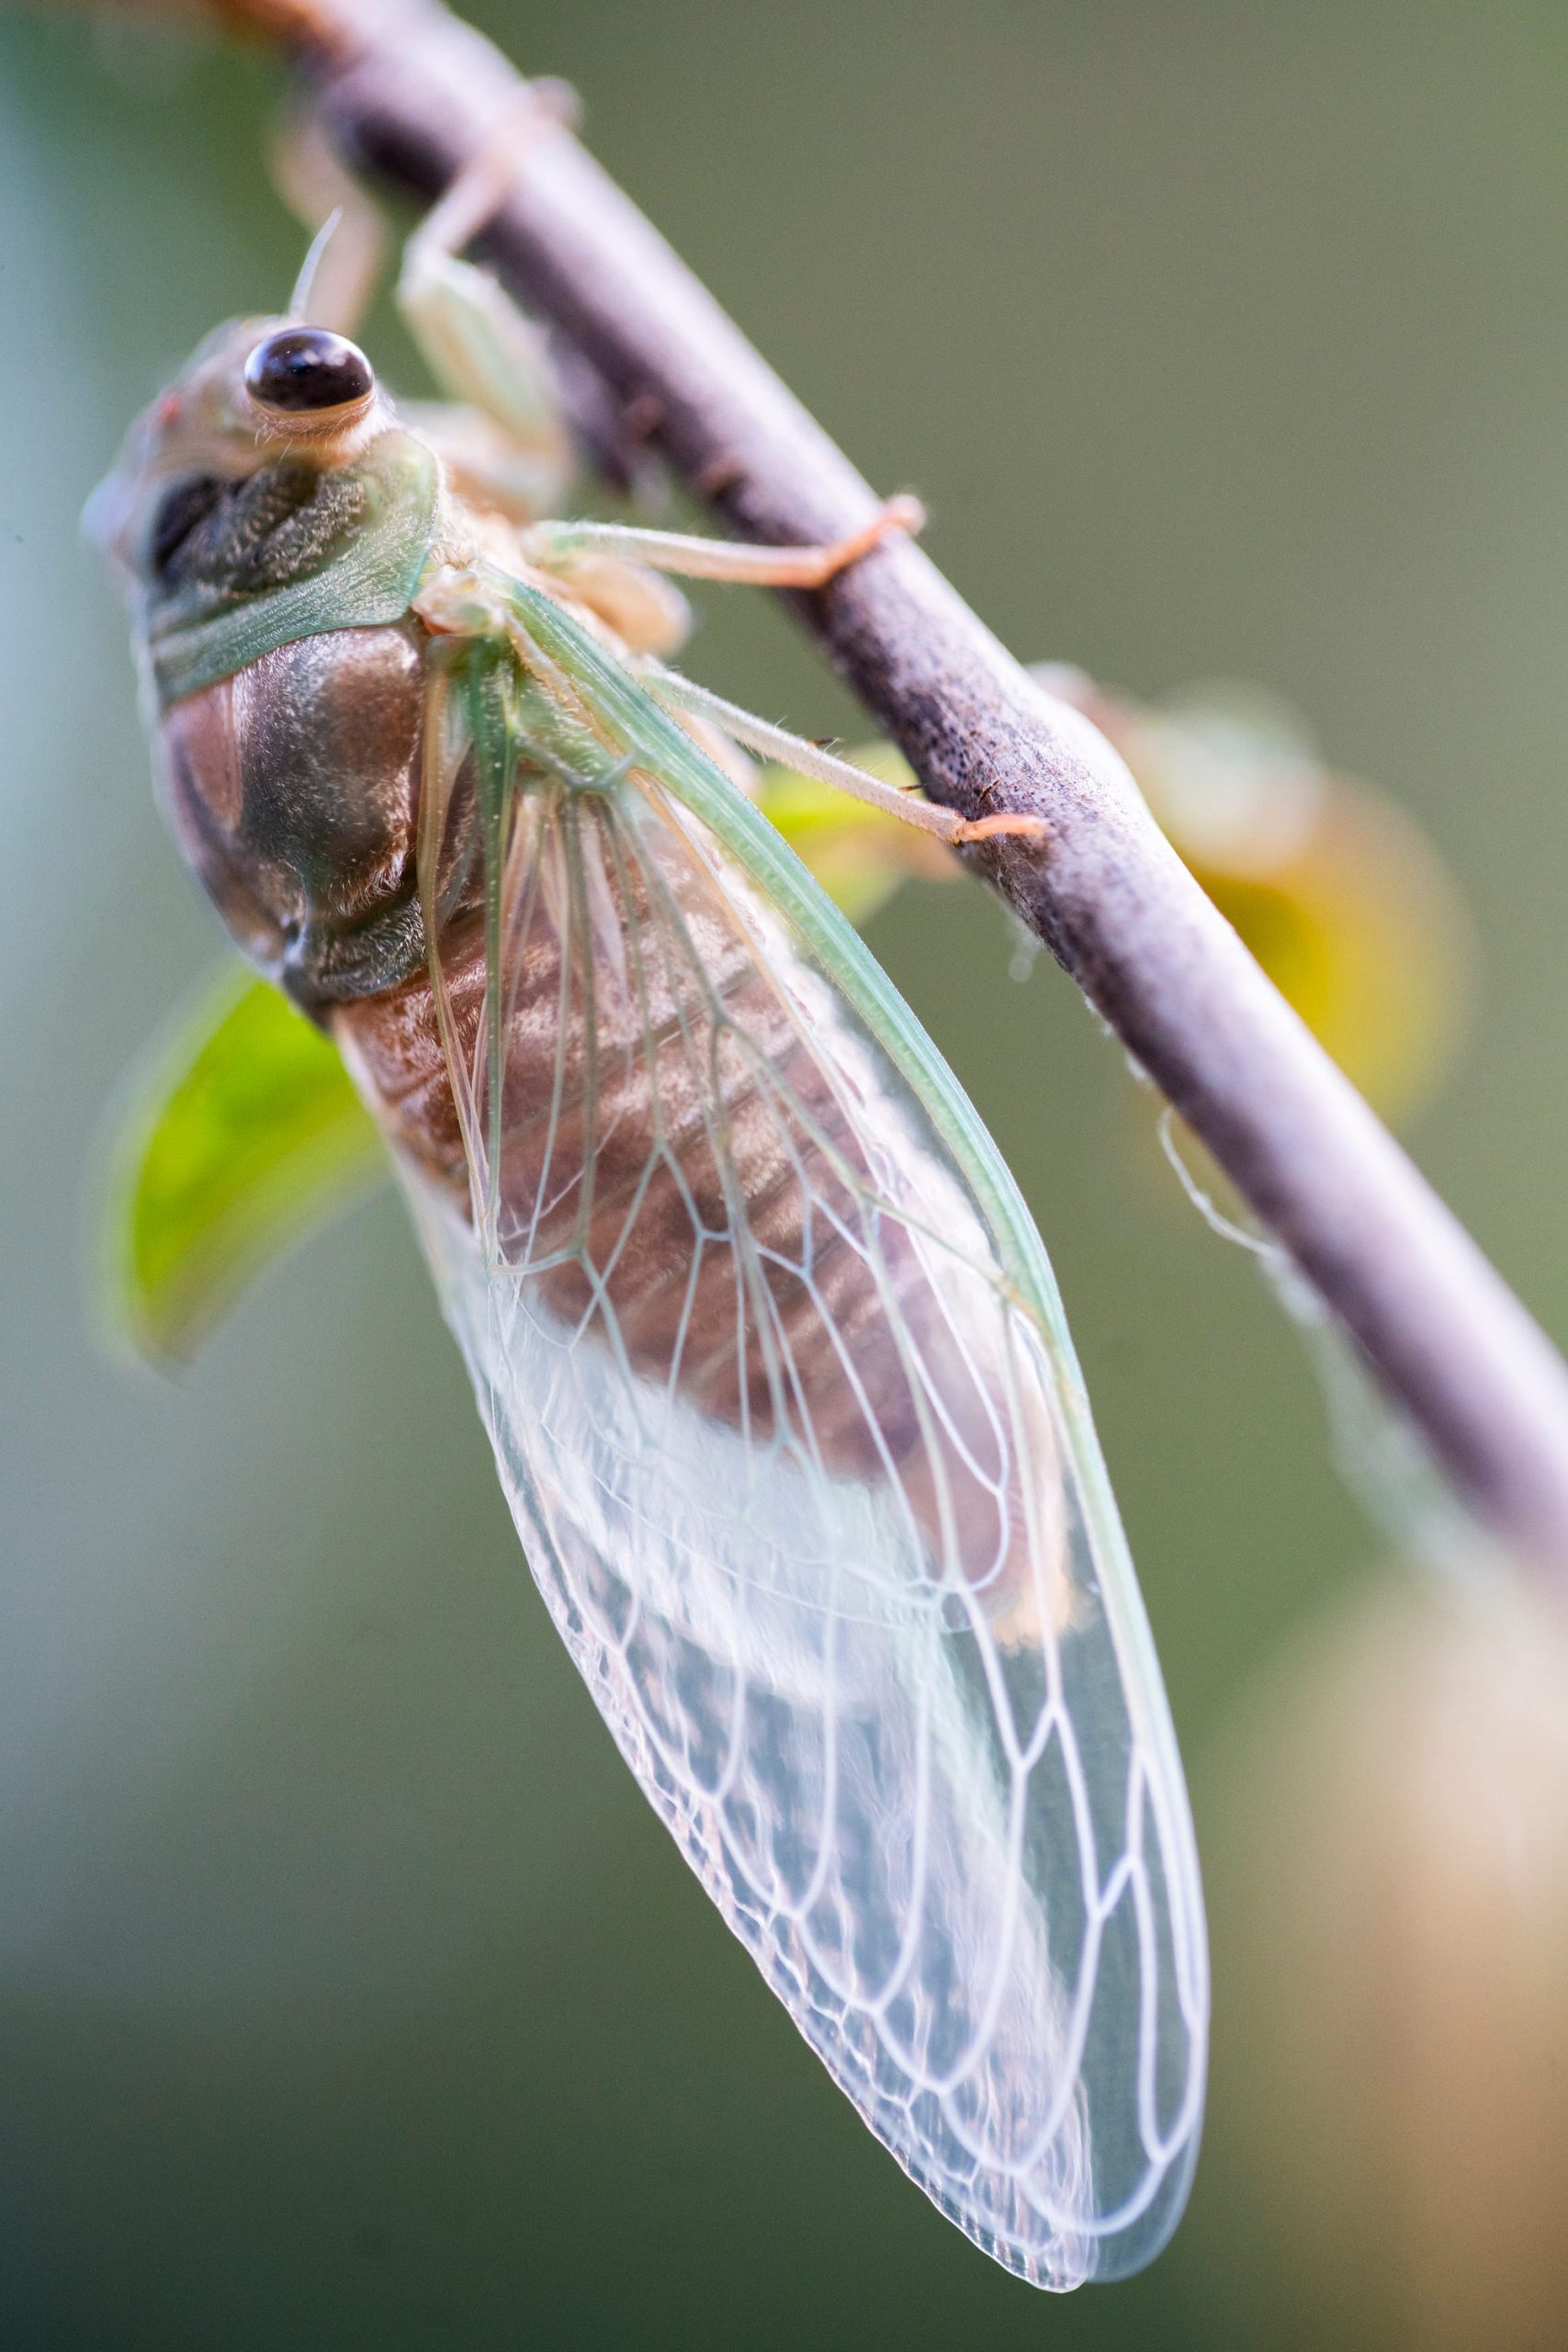 A Chicago area woman among the Cicada obsessed